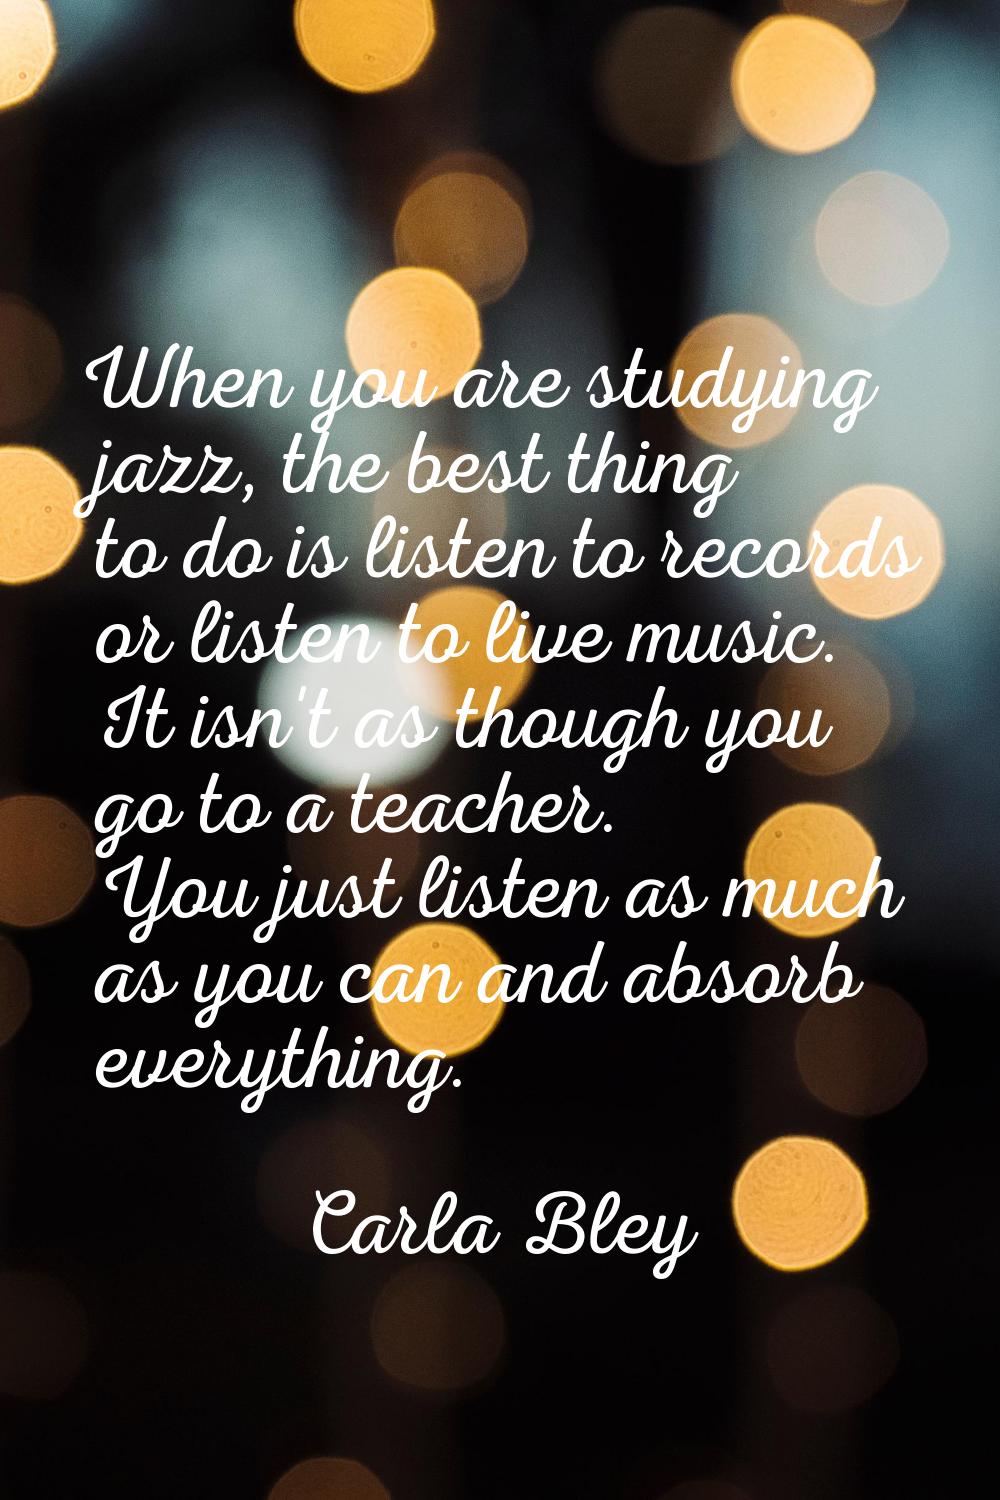 When you are studying jazz, the best thing to do is listen to records or listen to live music. It i